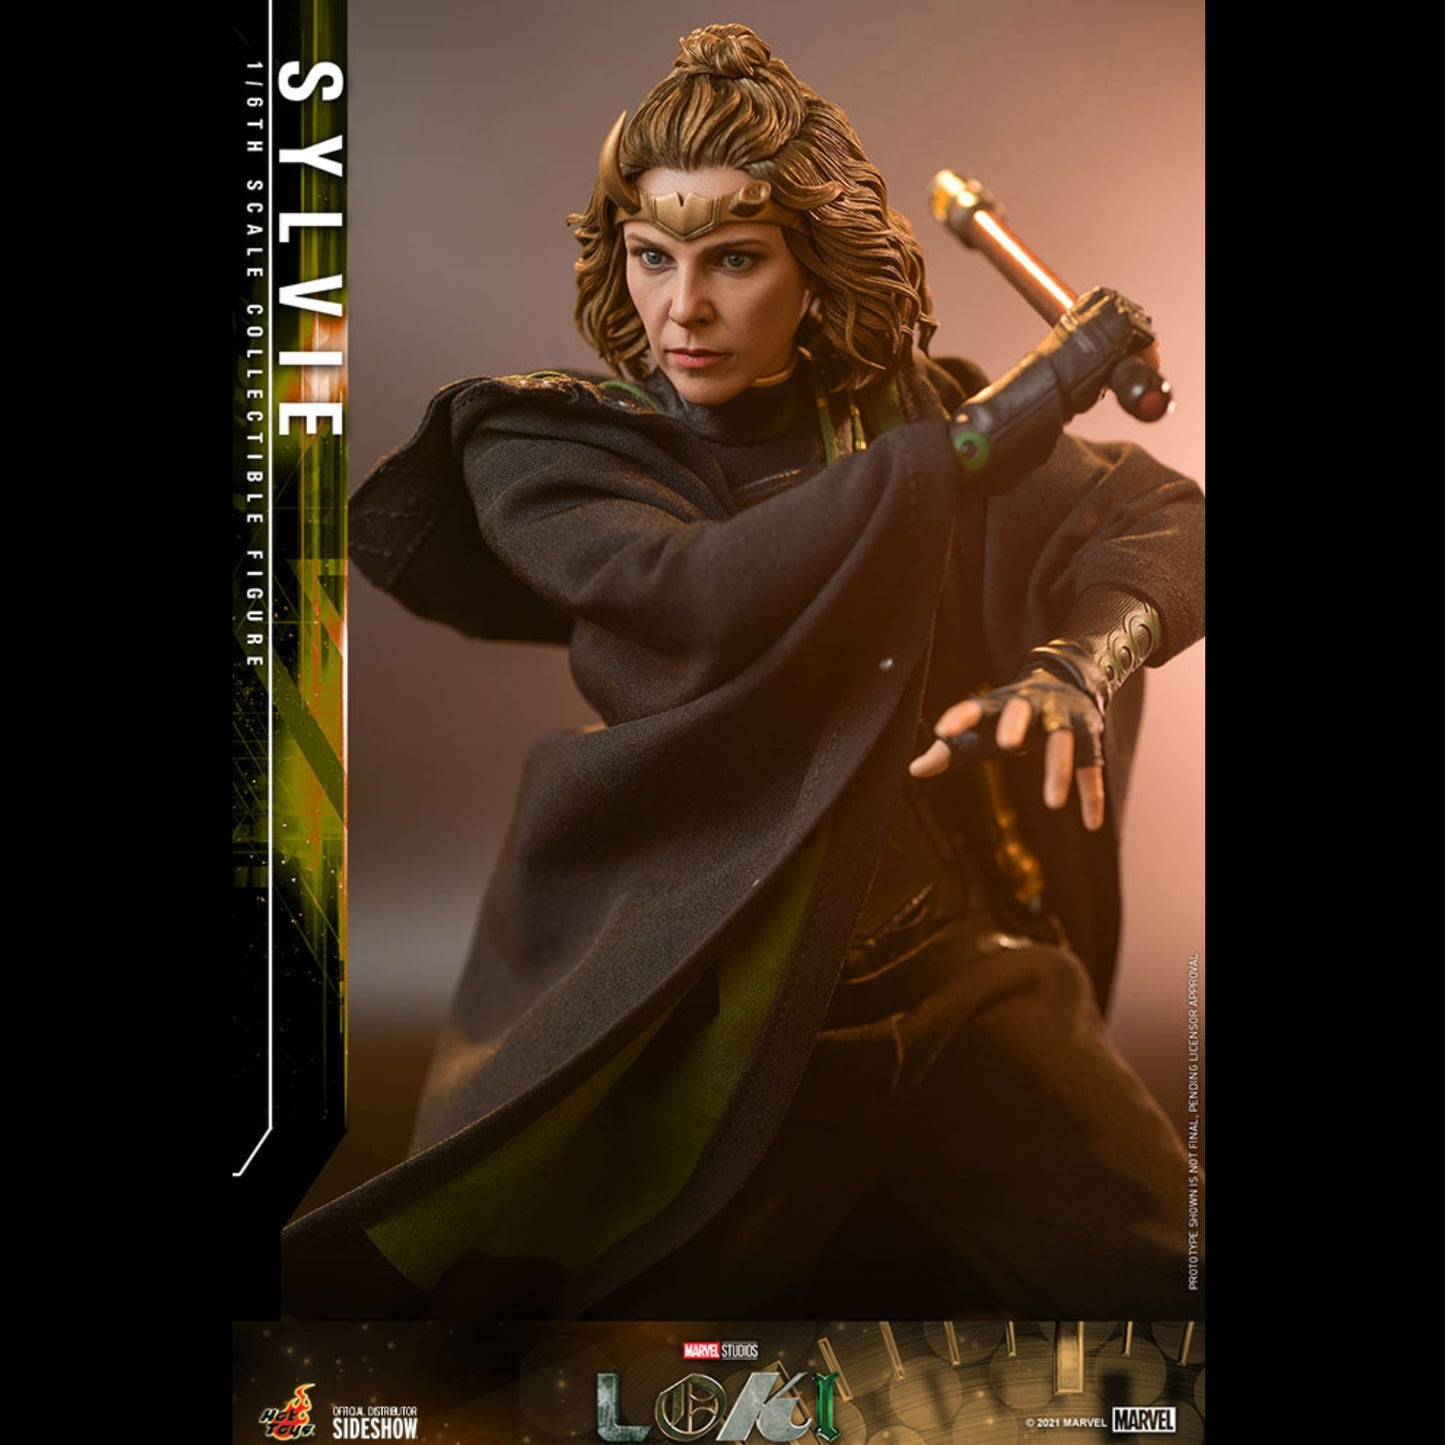 Sylvie with Sword Loki Funko Pop! – Collector's Outpost